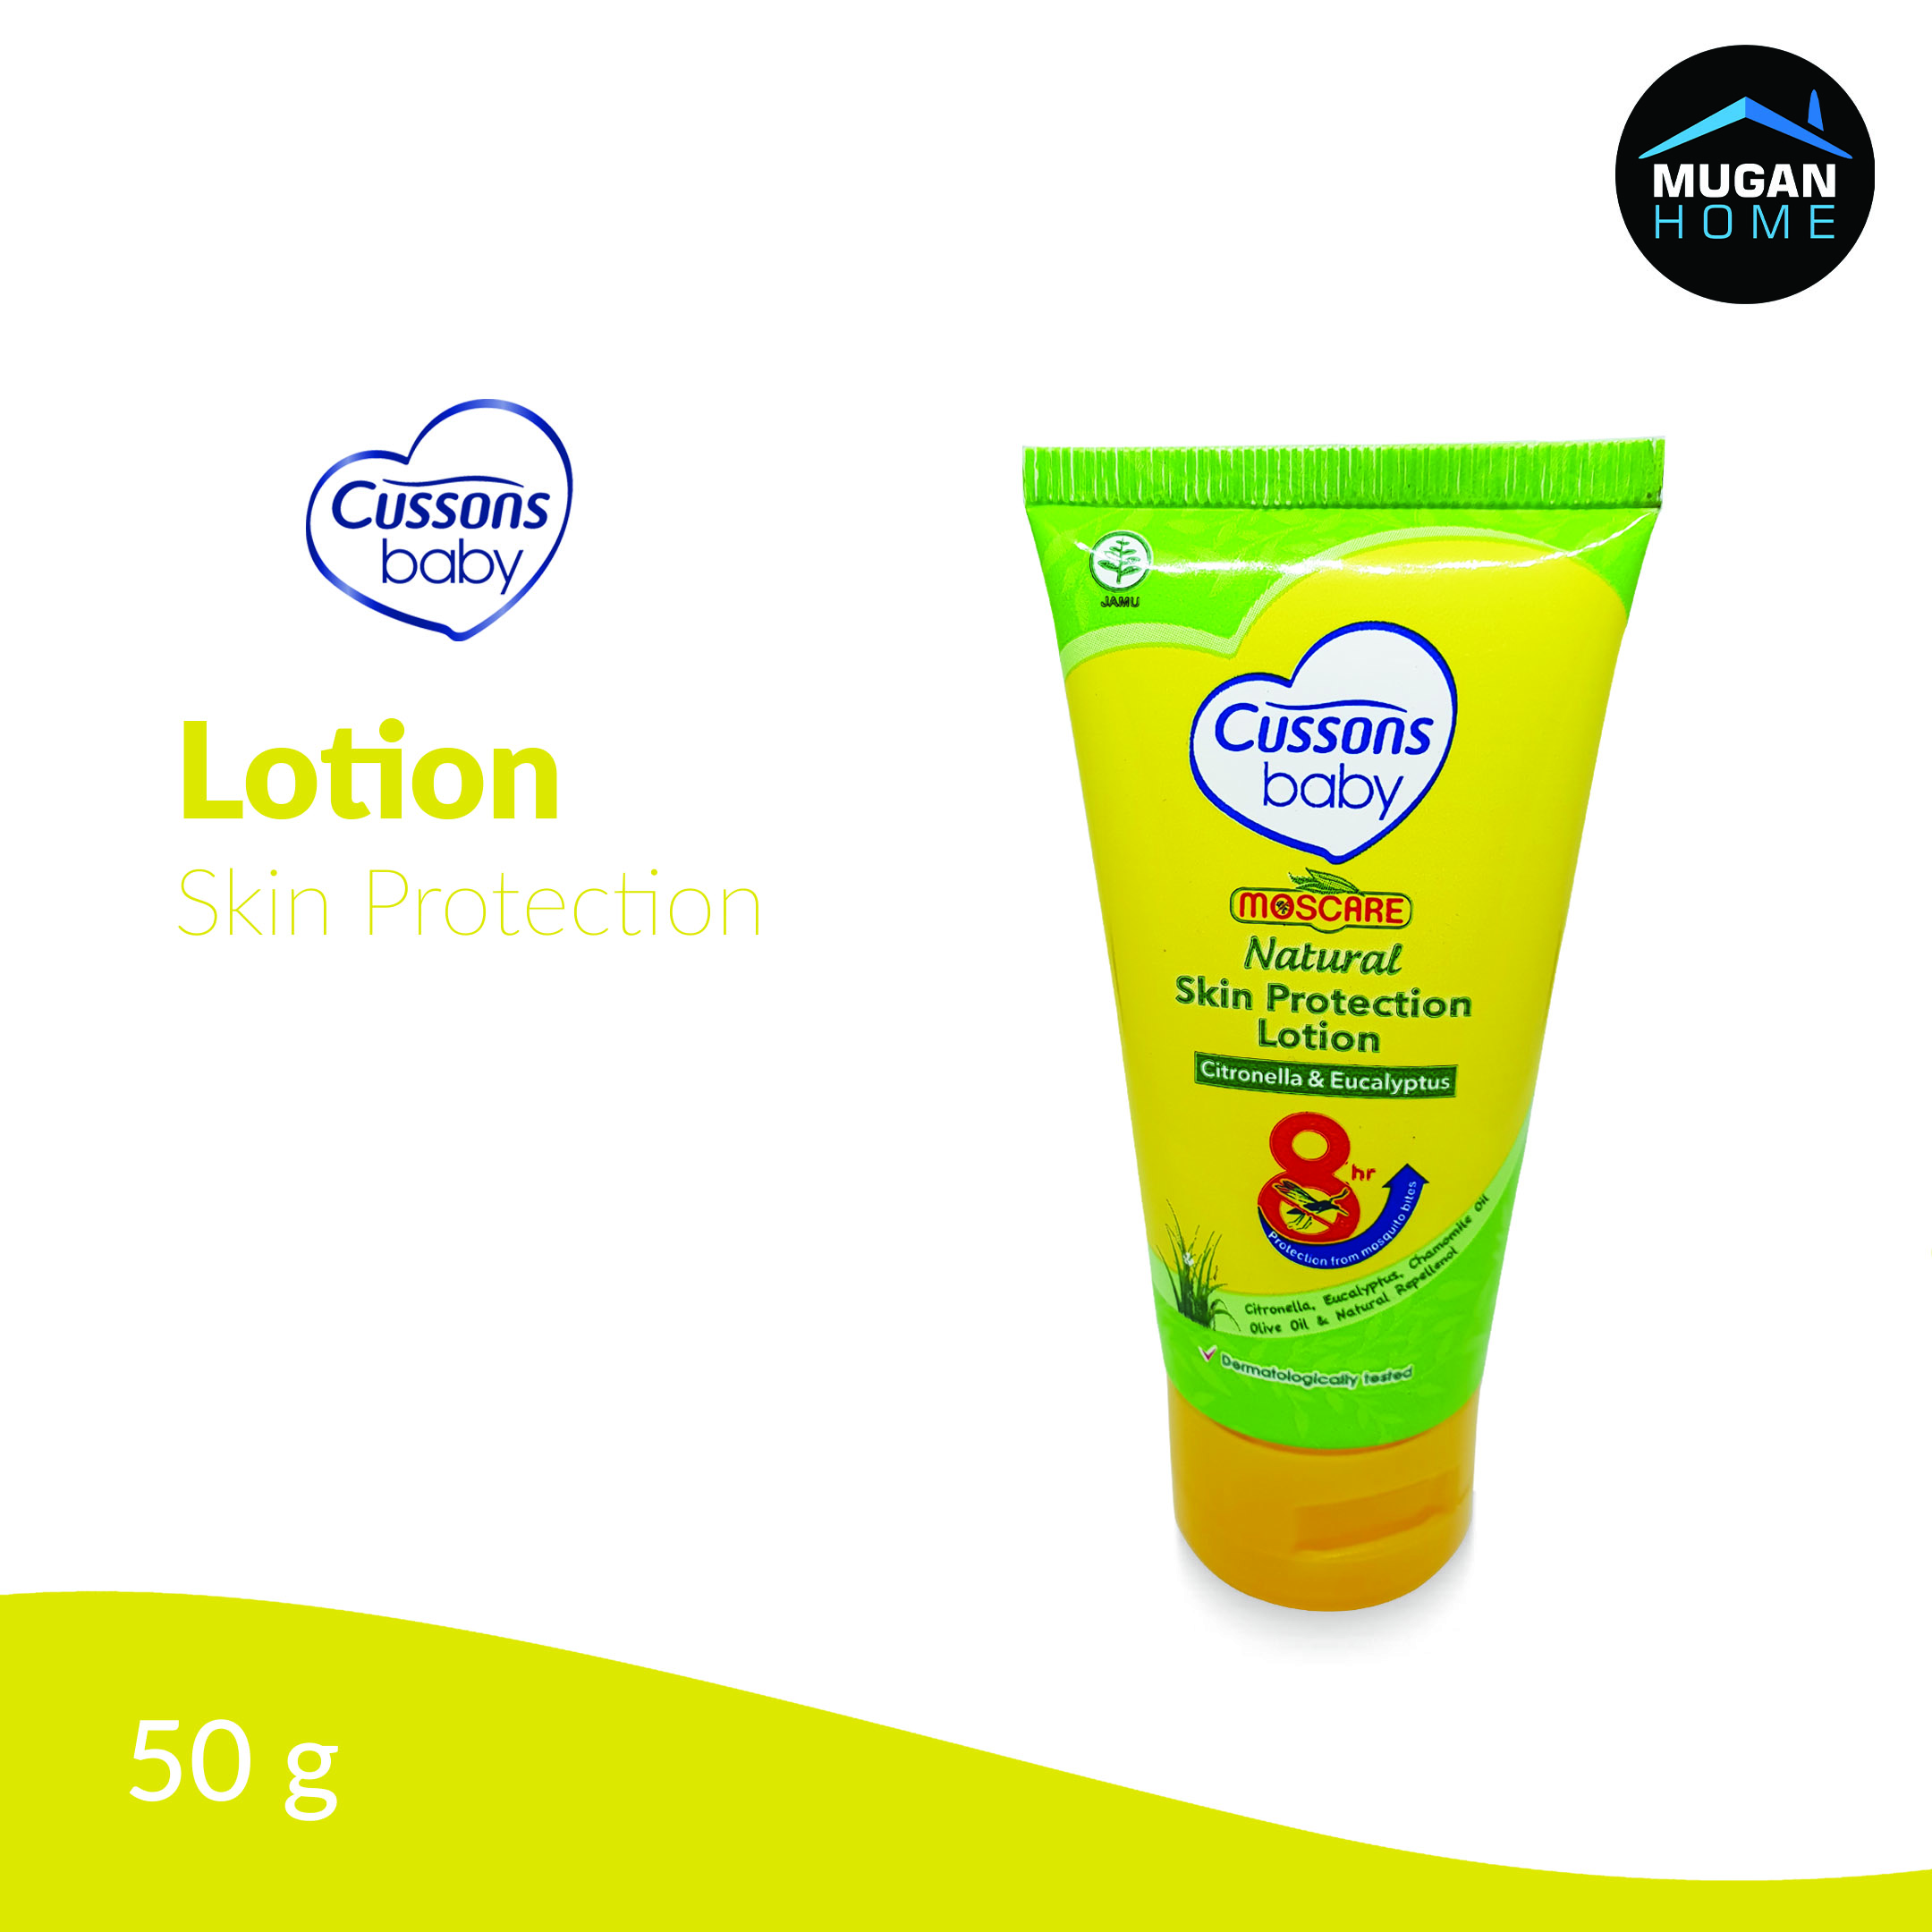 CUSSONS BABY MOSCARE NATURAL SKIN PROTECTION LOTION 50GR  